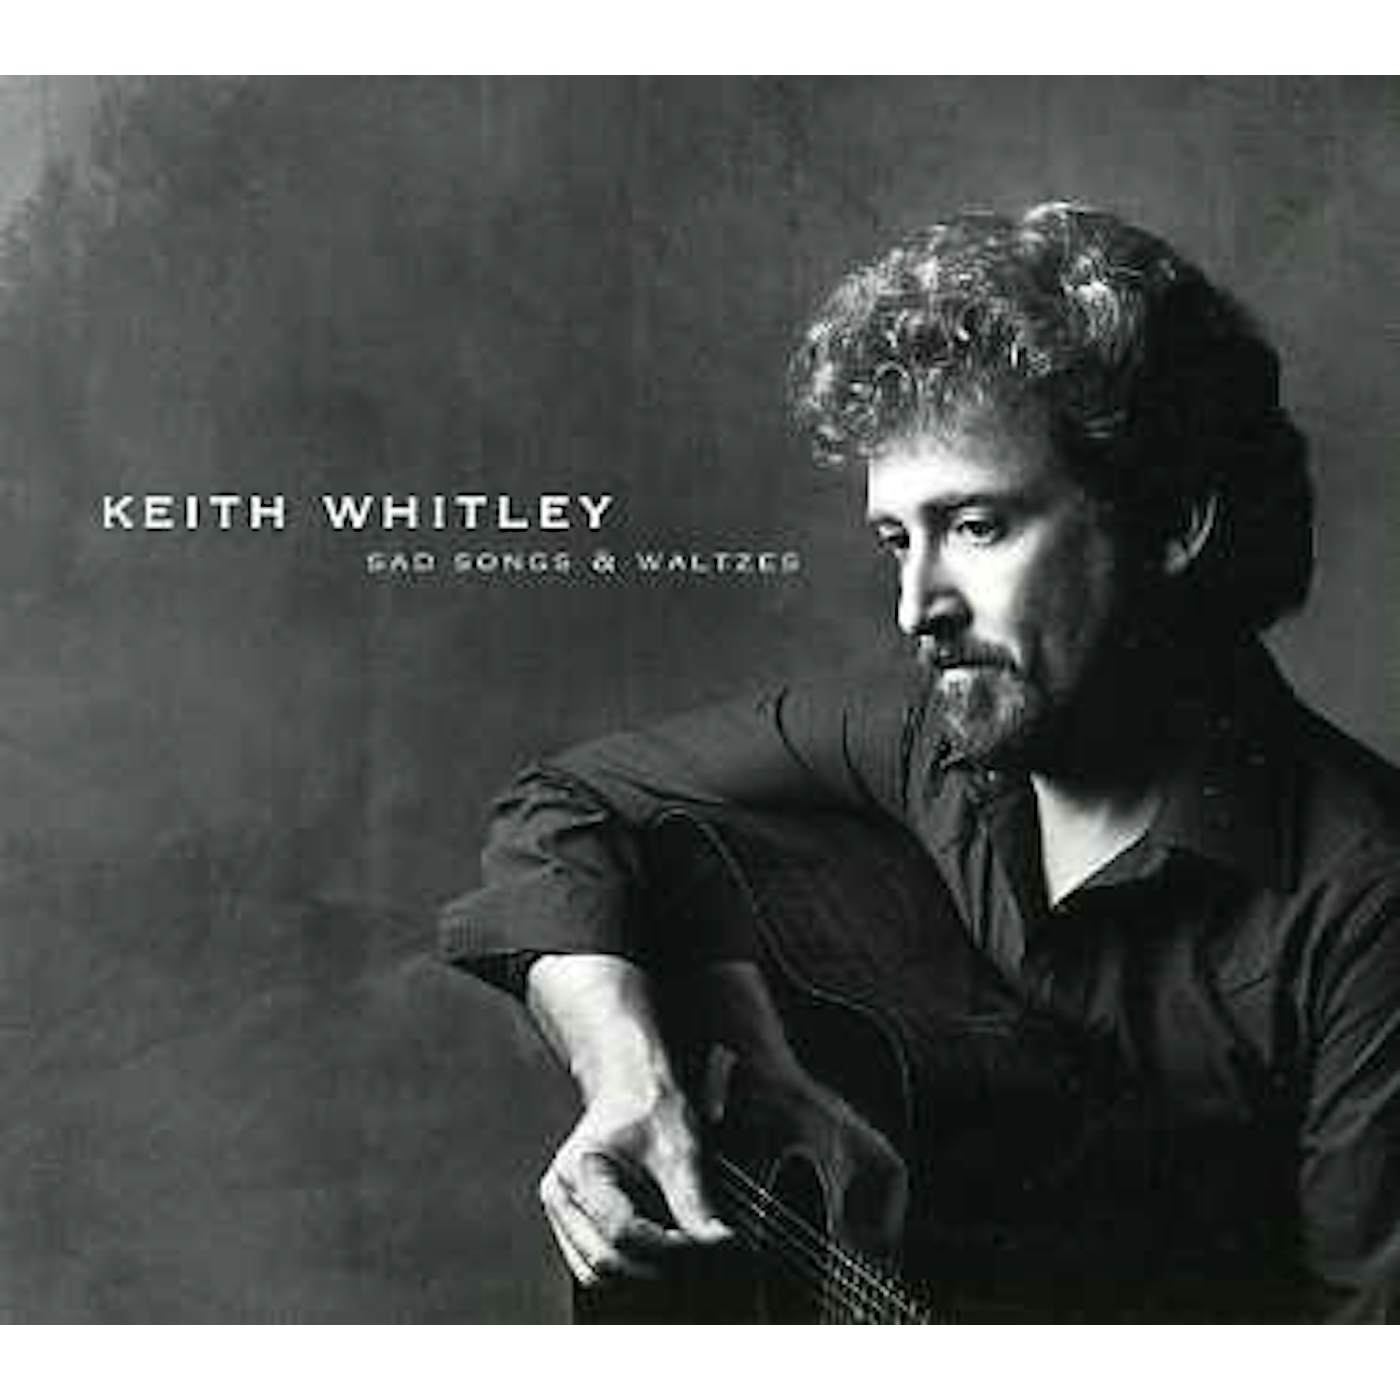 Keith Whitley SAD SONGS & WALTZES CD